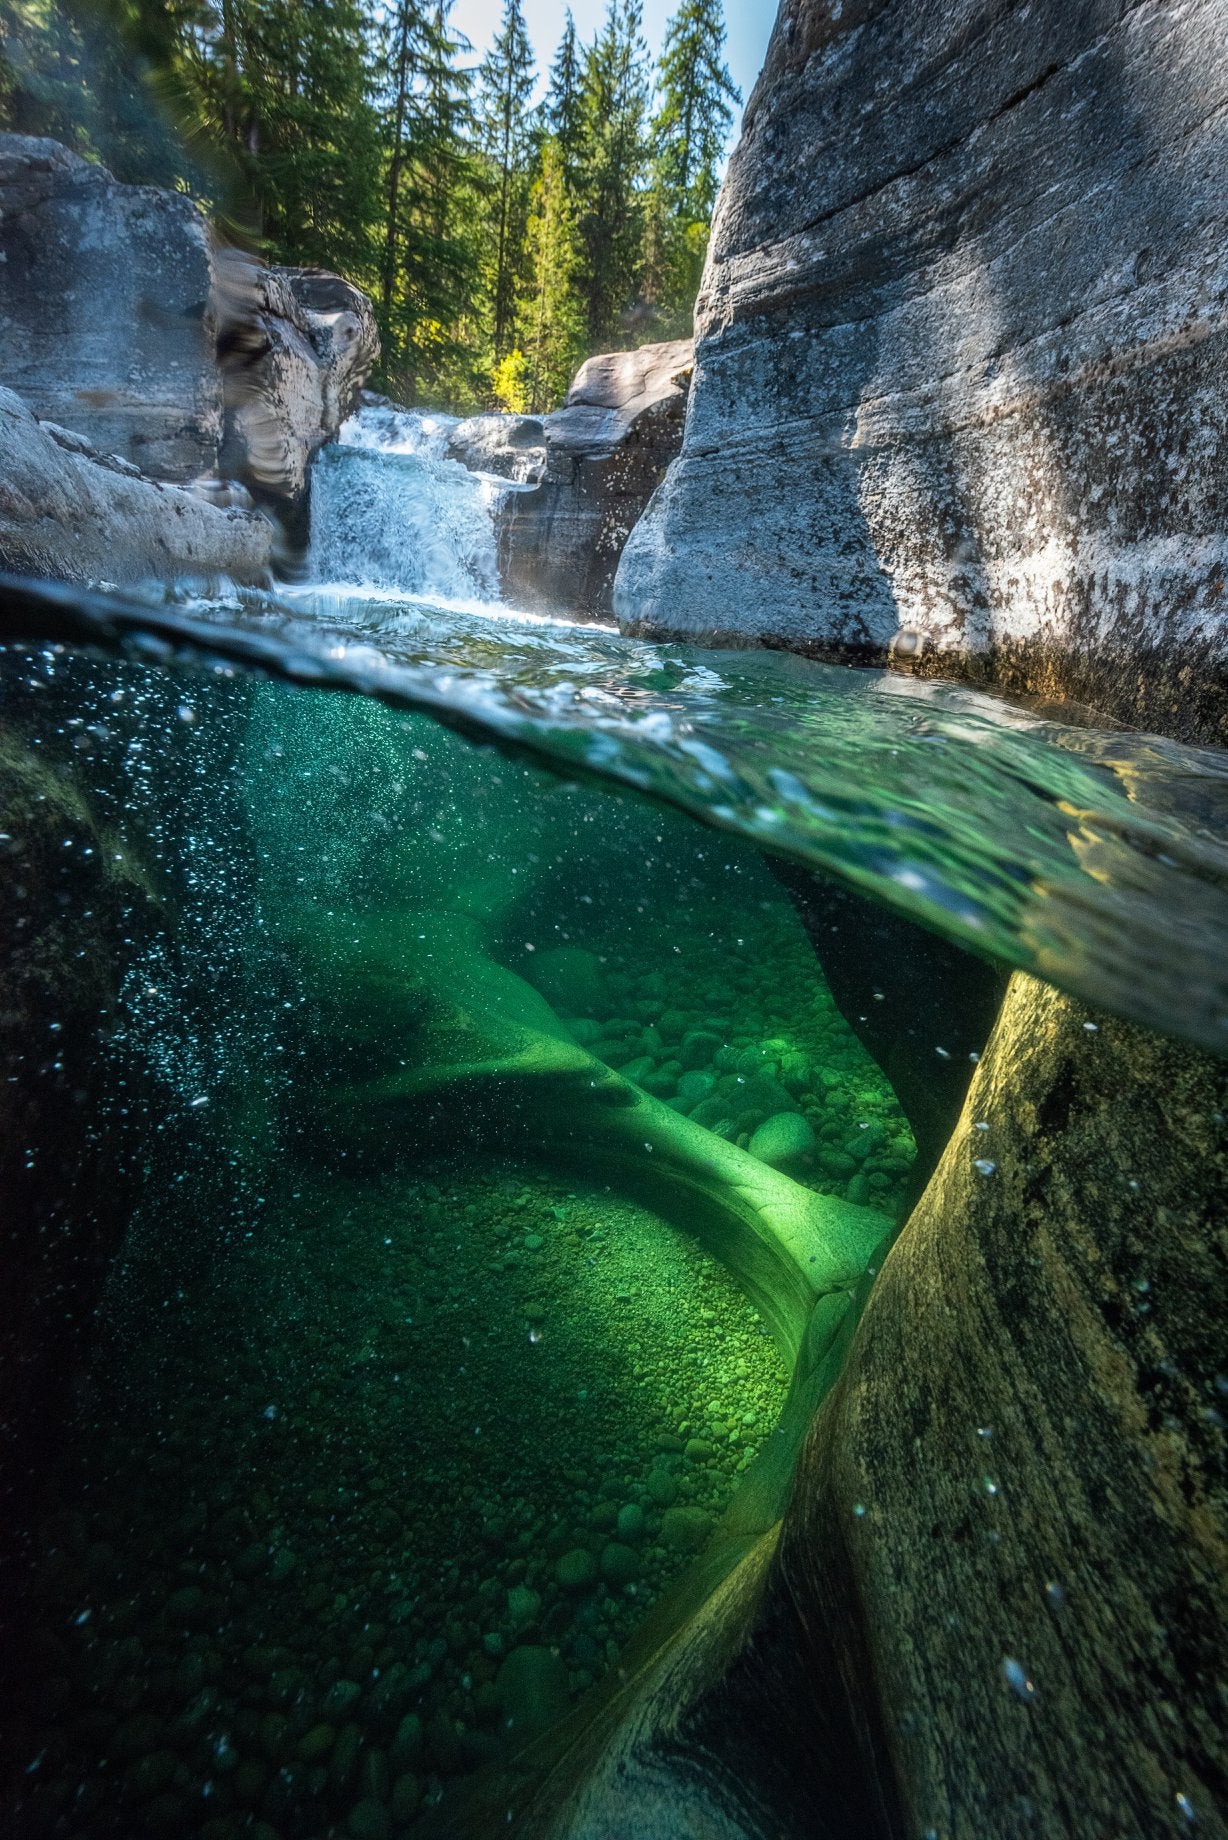 Underwater through a rocky pool, a waterfall in the background and bubbles in the foreground. A flowing creek near Castlegar, British Columbia.